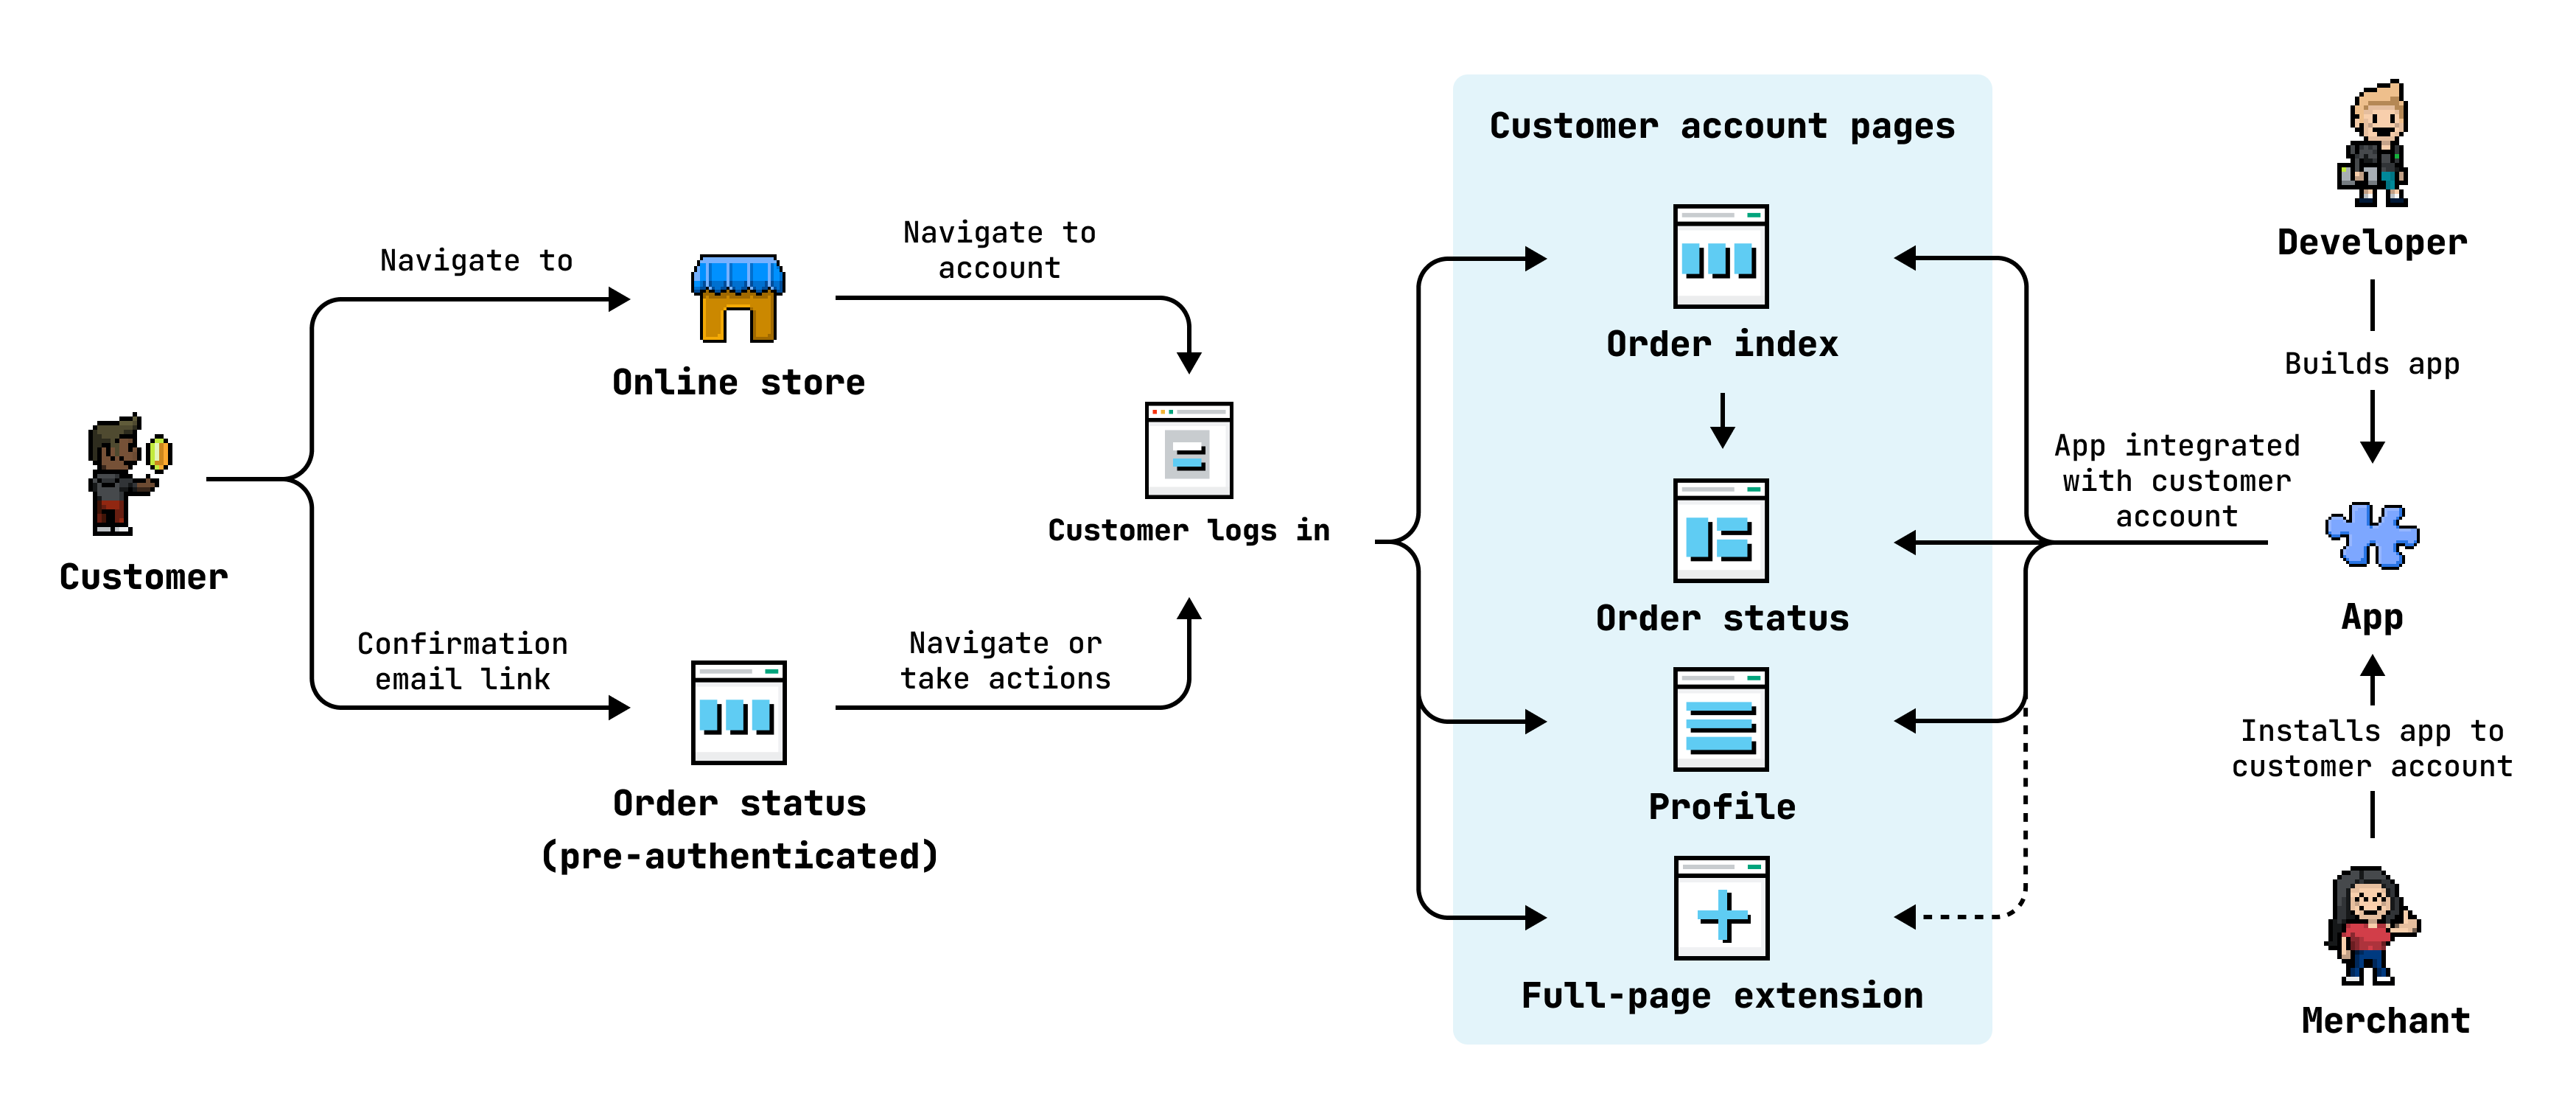 A diagram showing that a customer can navigate to their account from the online store, or from order notifications. Developers can build extensions for all customer account pages, and create full-page extensions to create new pages.